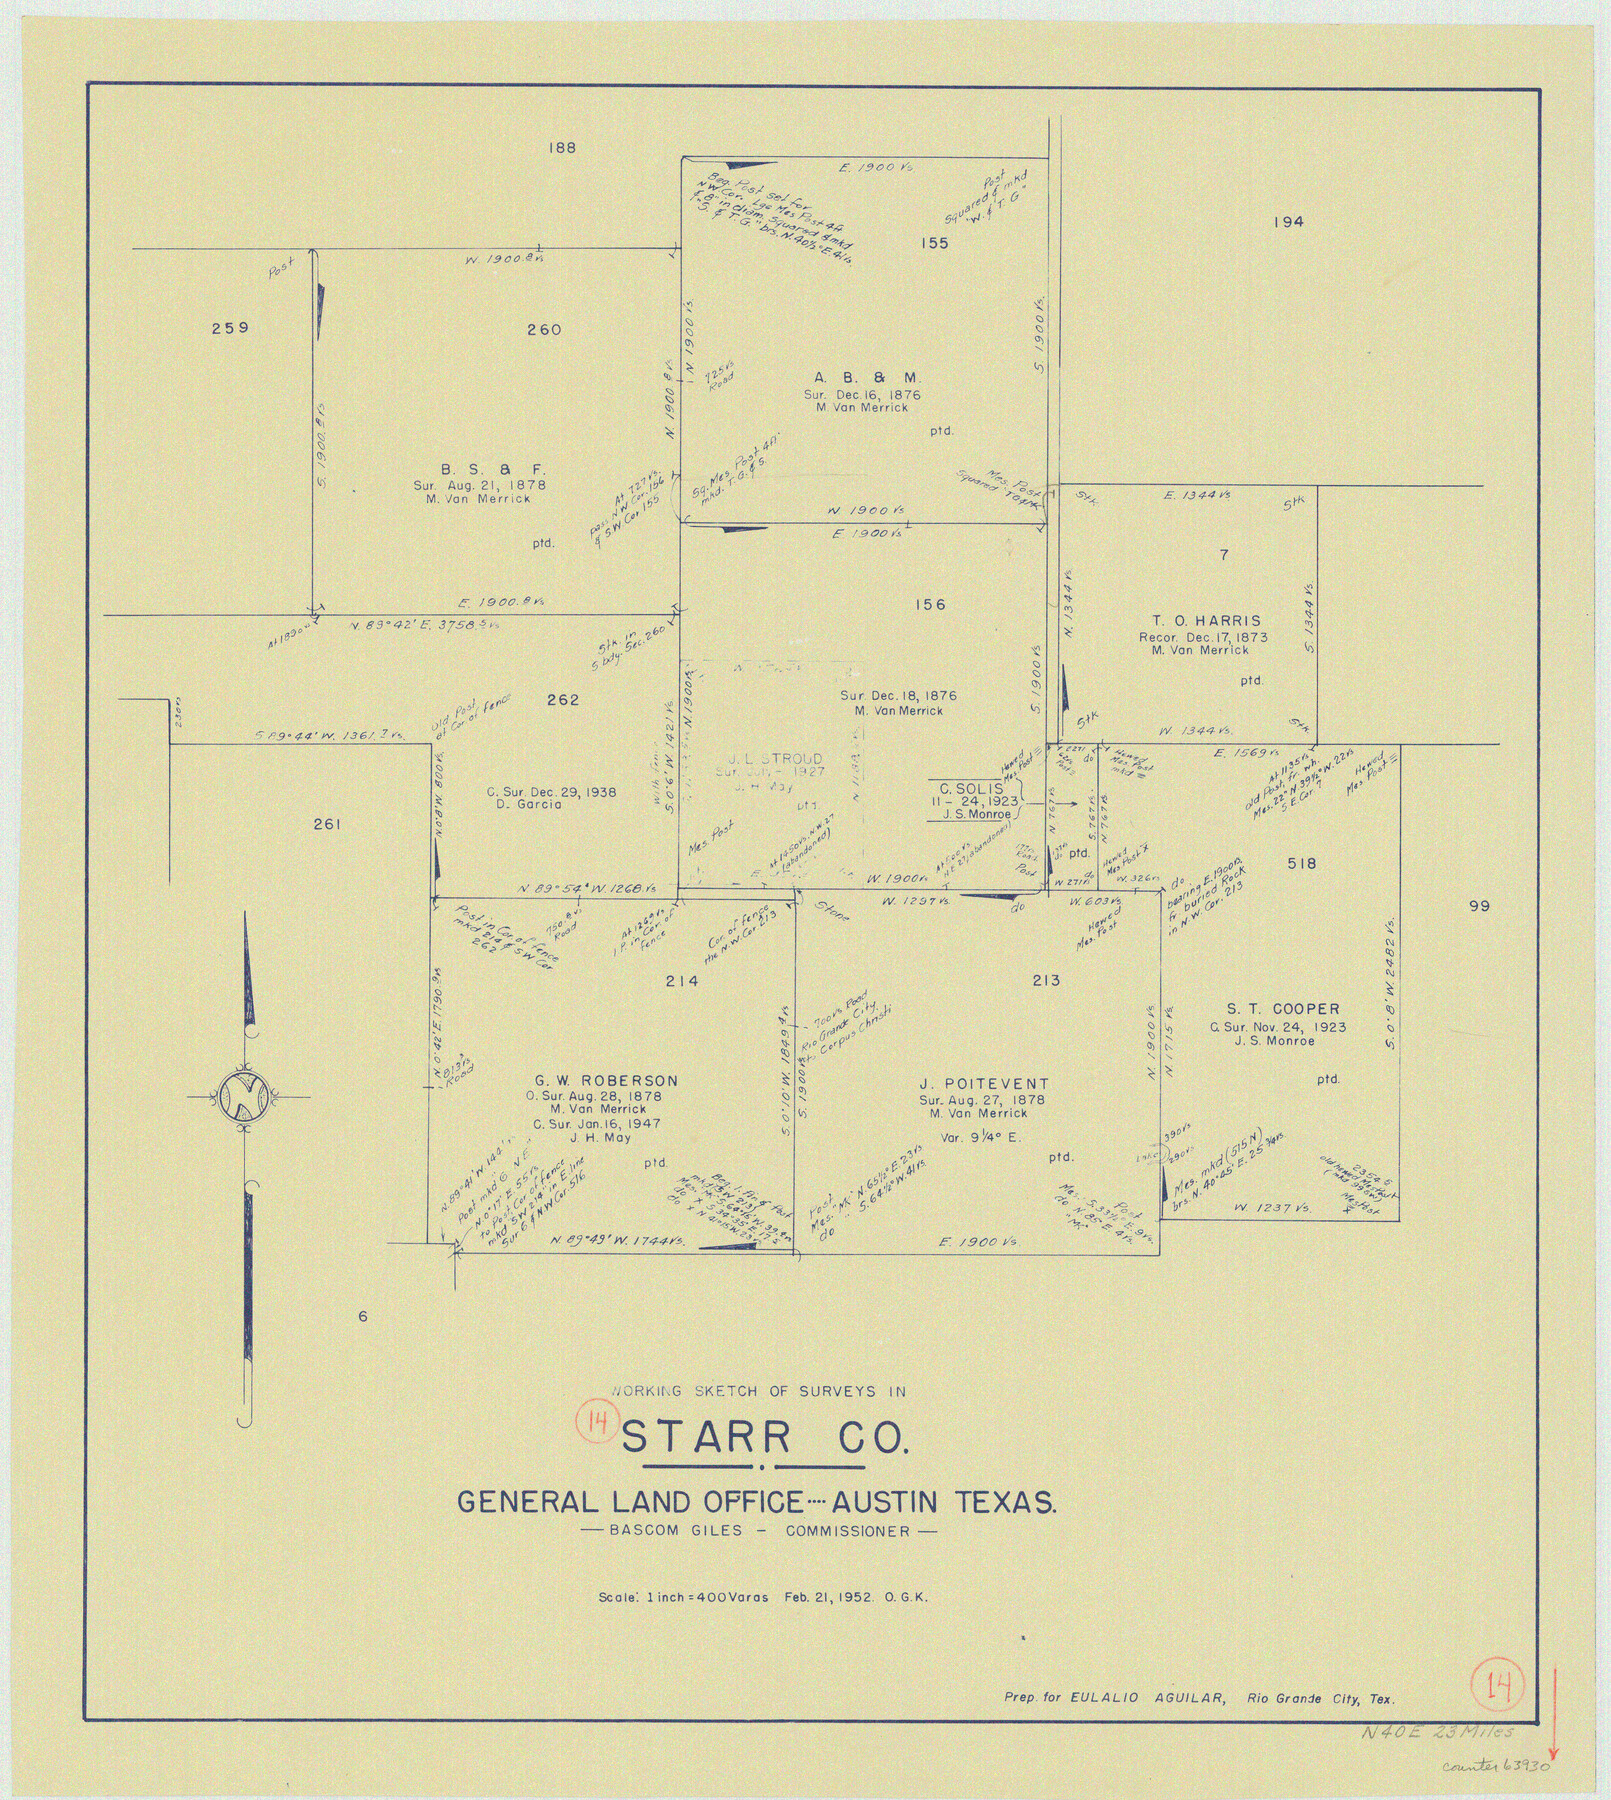 63930, Starr County Working Sketch 14, General Map Collection